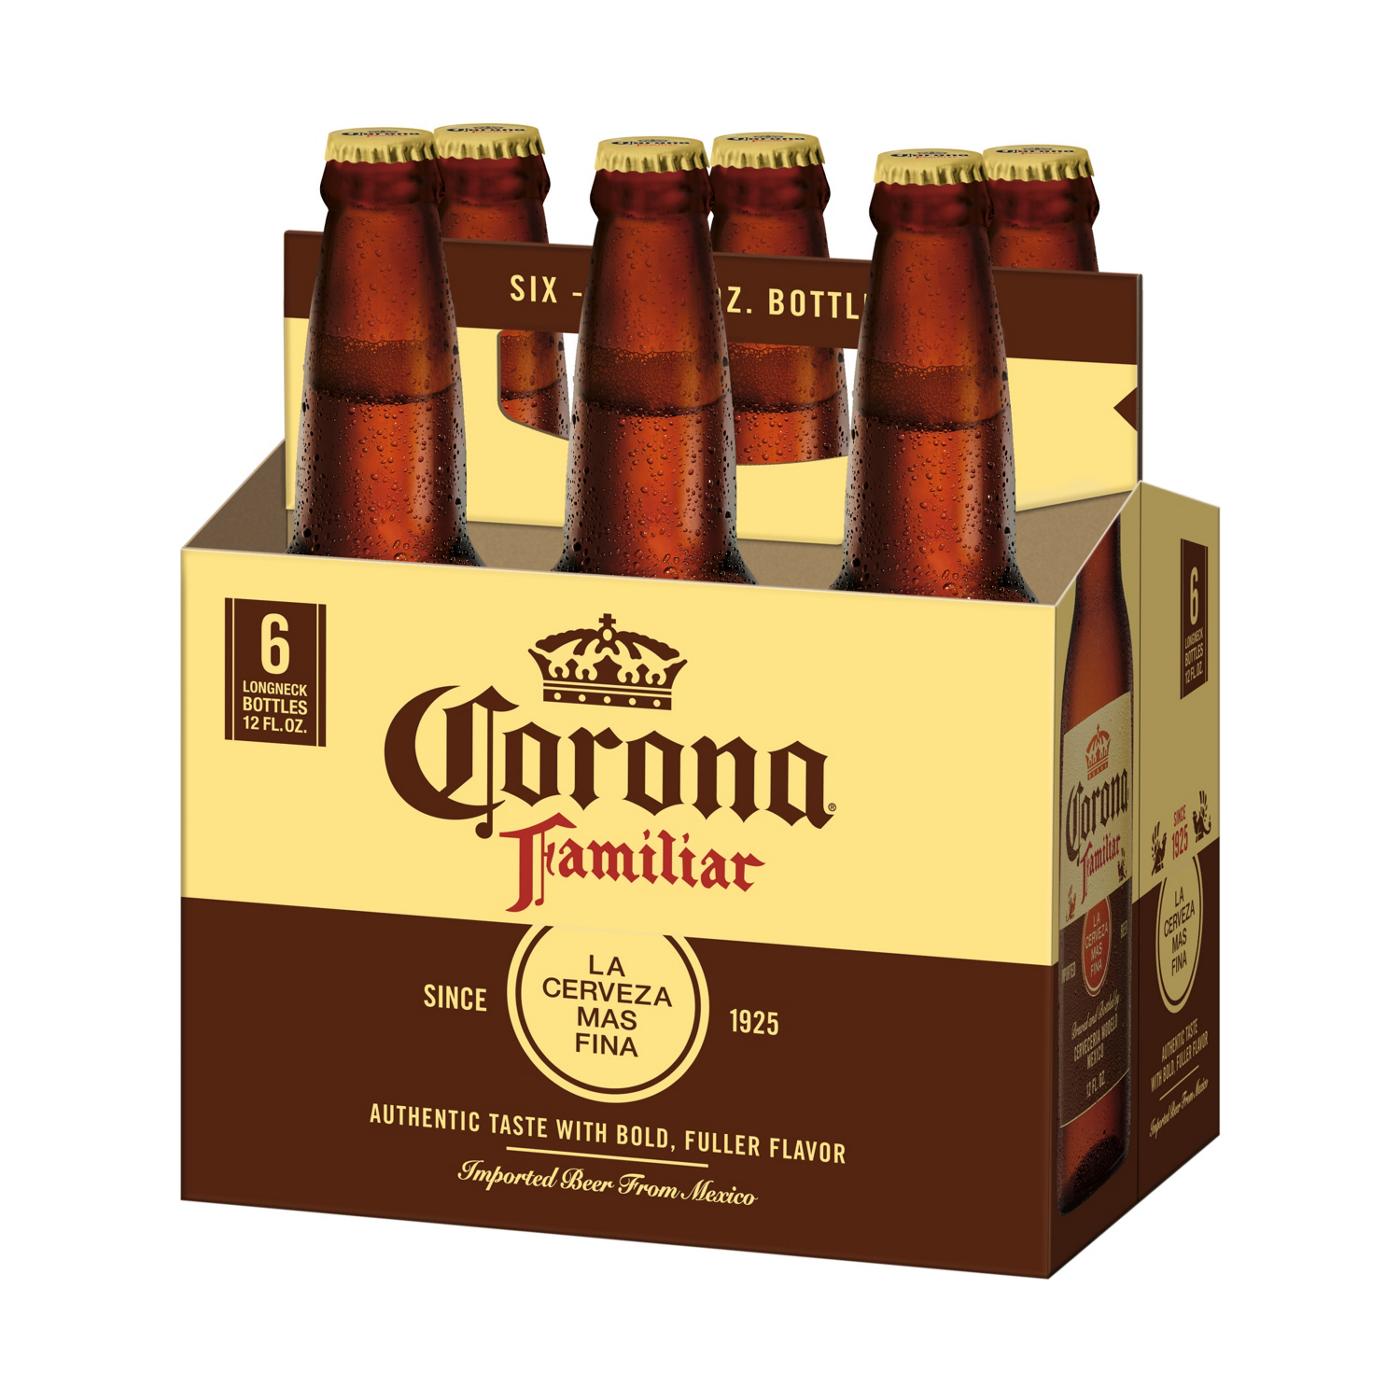 Corona Familiar Mexican Lager Import Beer 12 oz Bottles, 6 pk; image 7 of 10